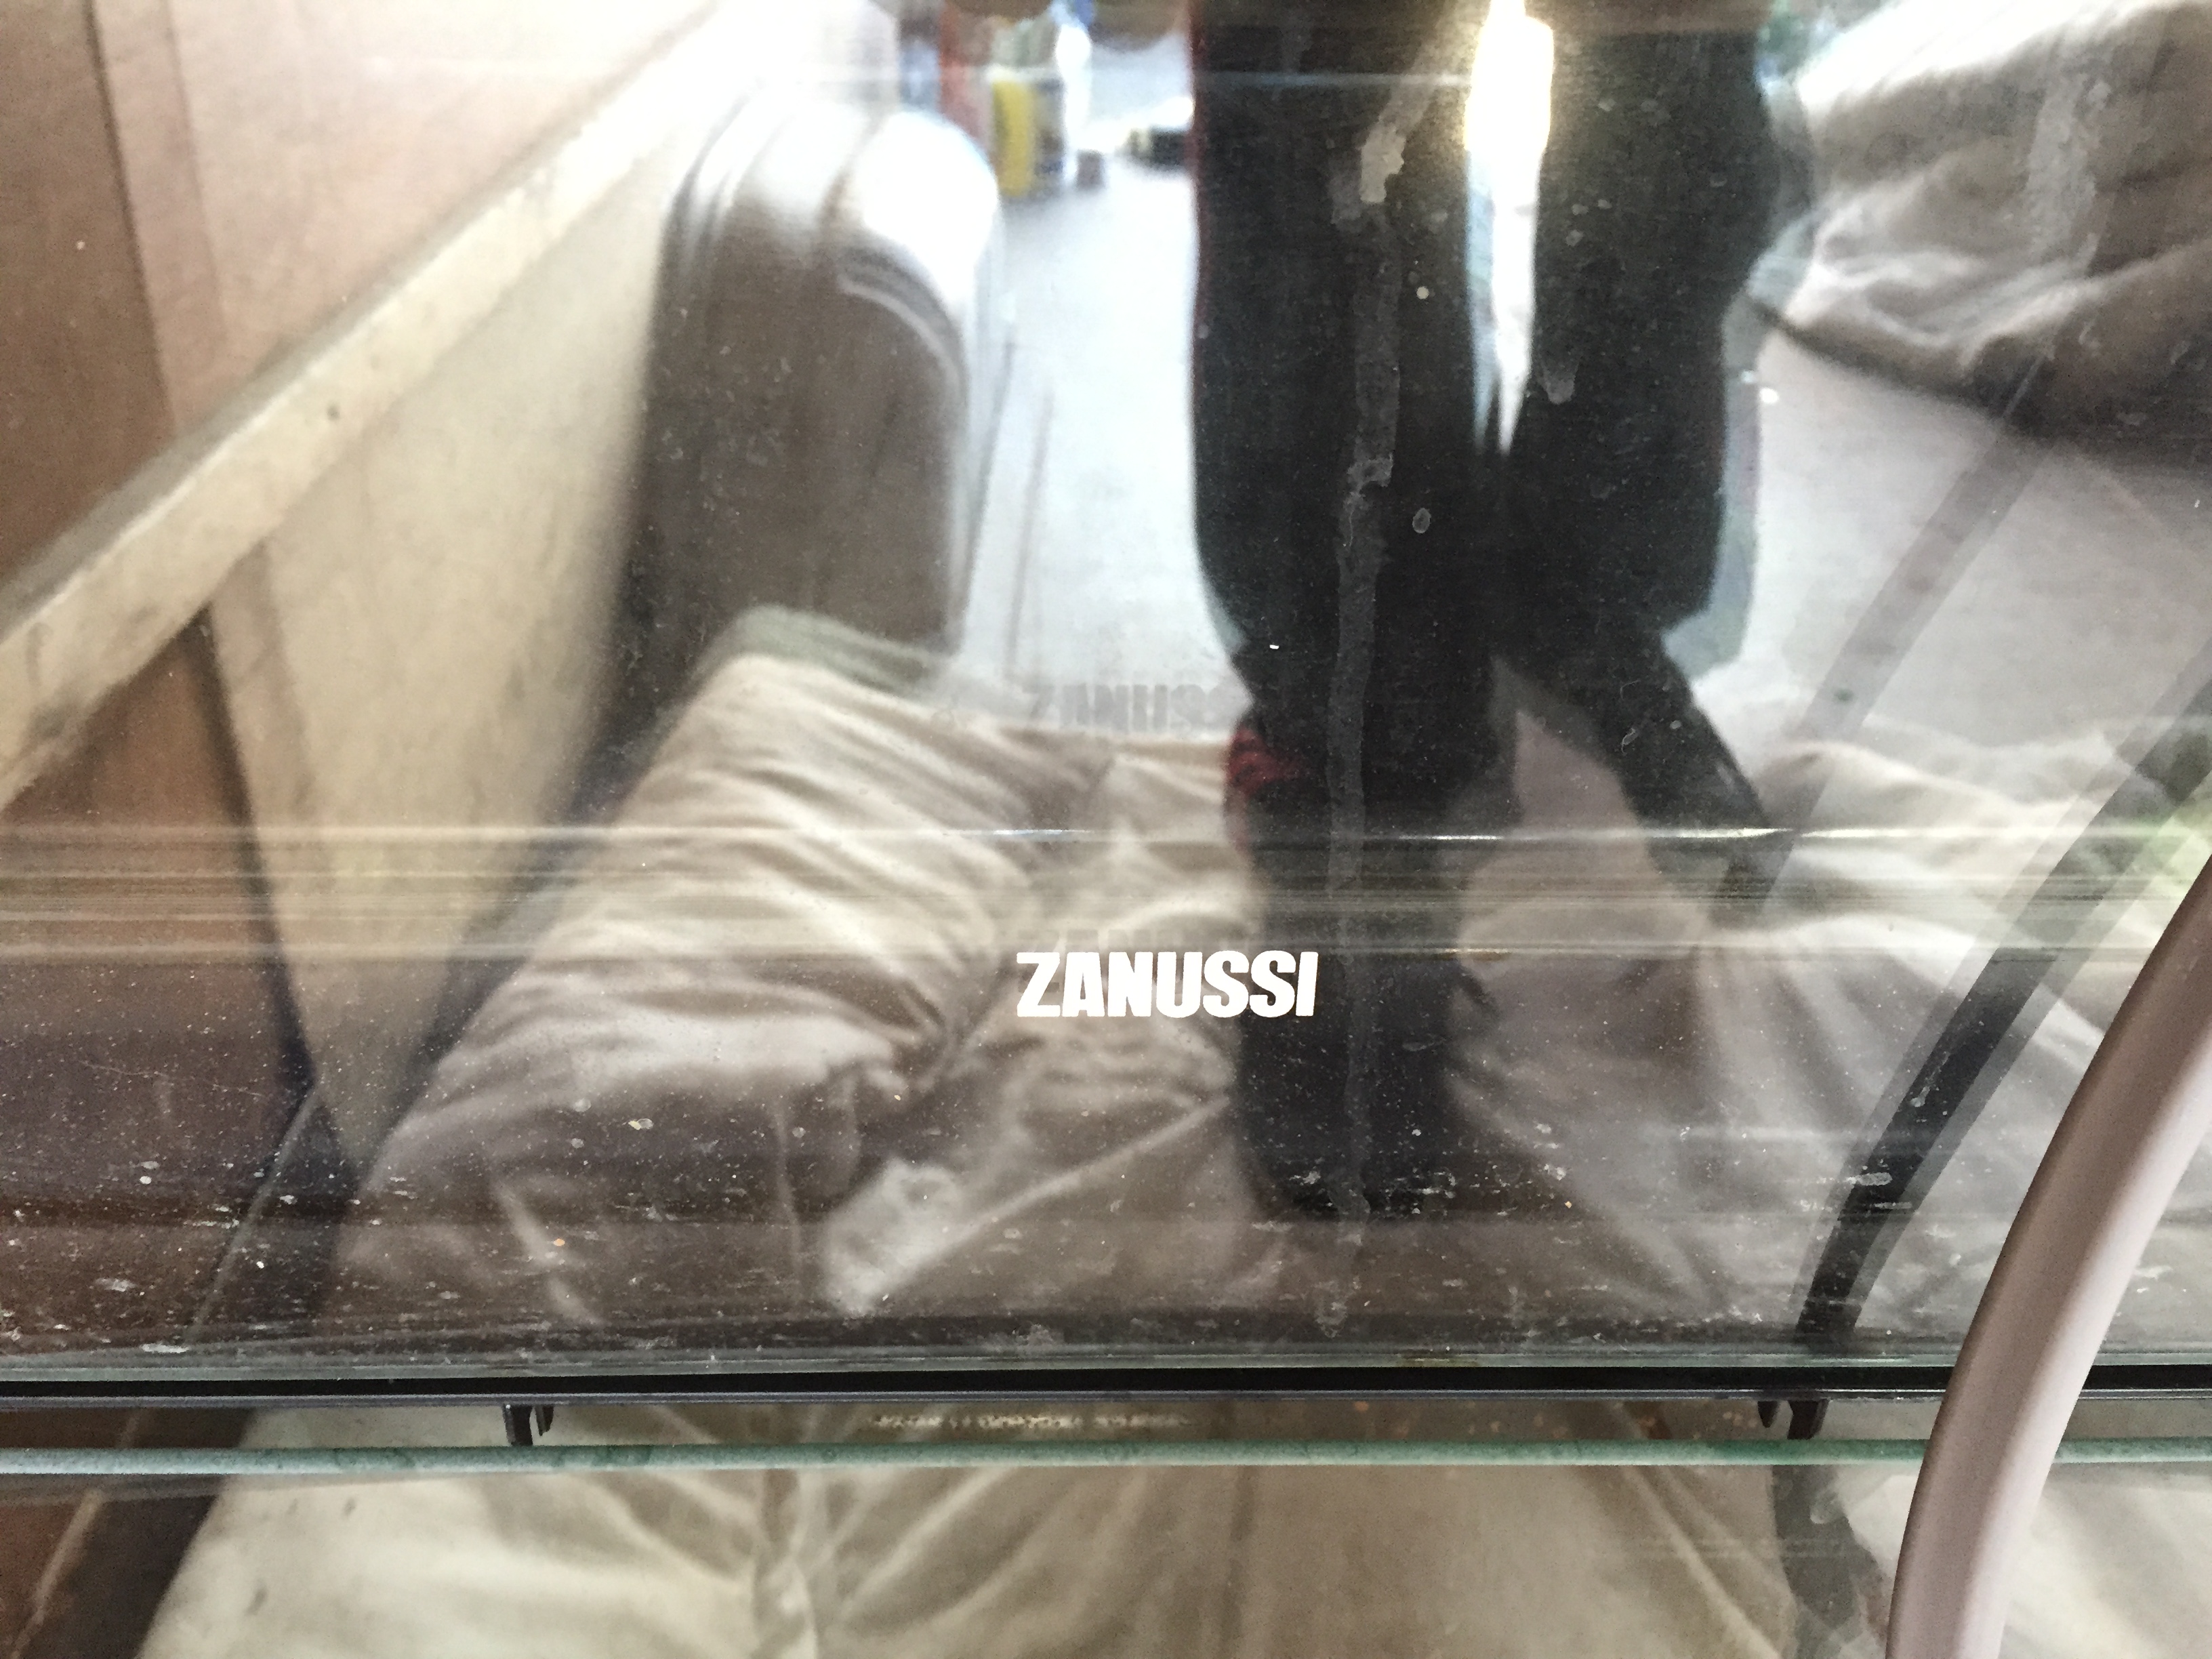 A Zanissi electric cooker with double ov - Image 3 of 4